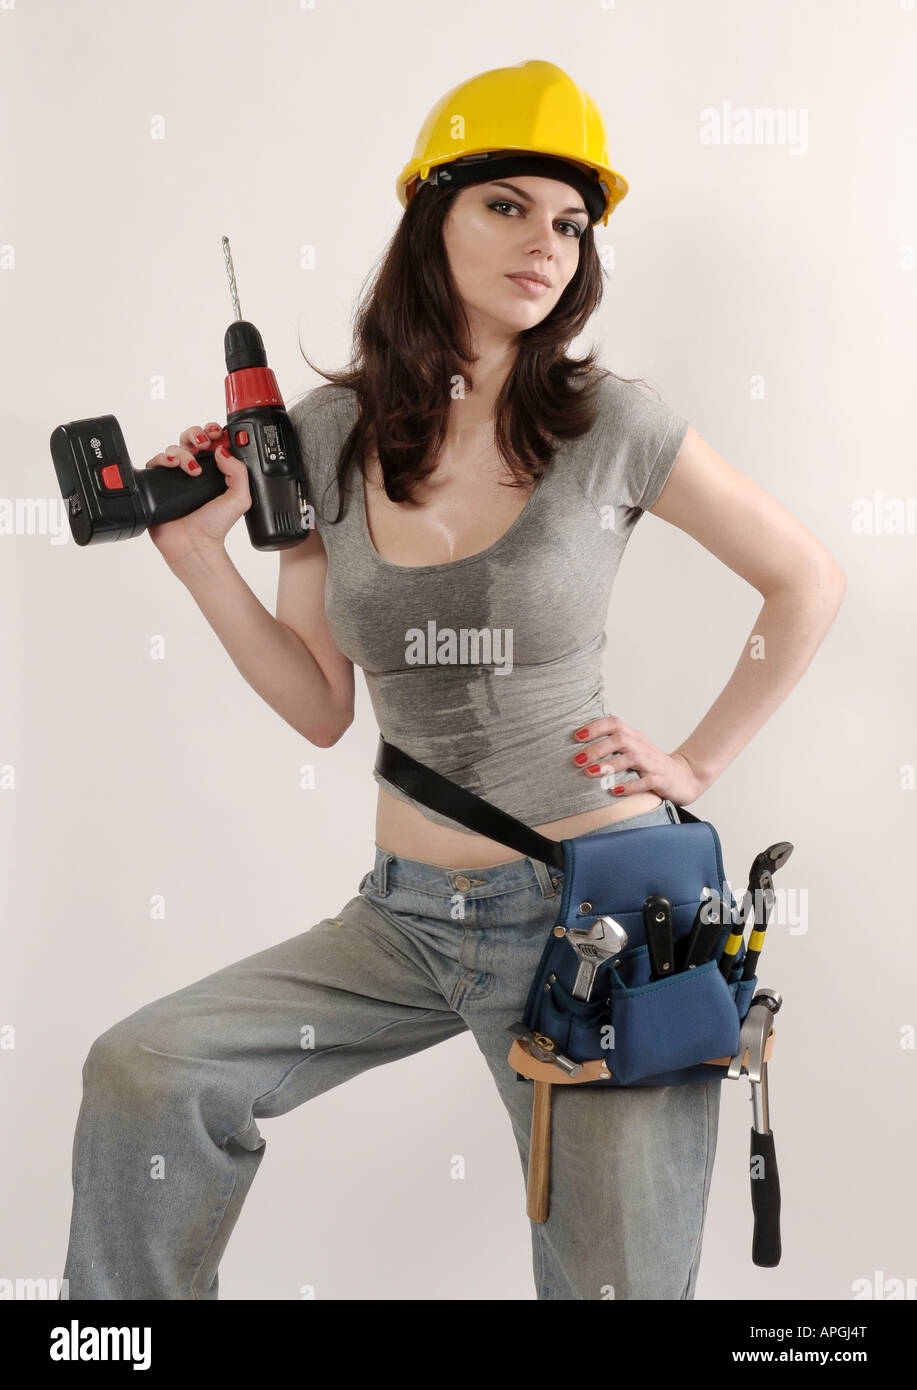 Sexy builder girl holding a drill Stock Photo